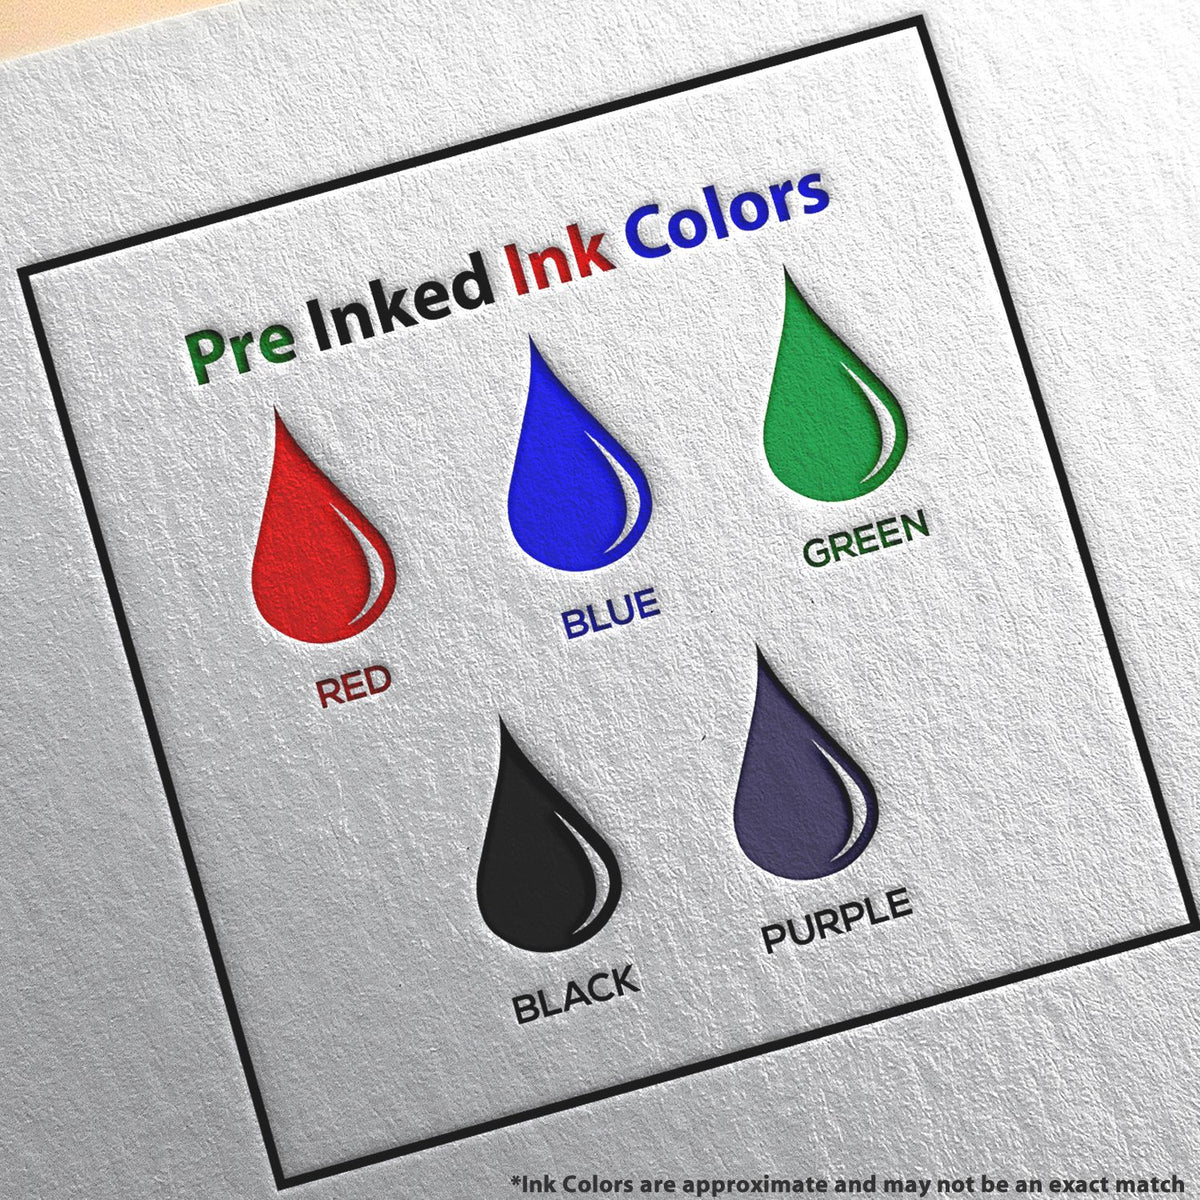 A picture showing the different ink colors or hues available for the Slim Pre-Inked Nebraska Land Surveyor Seal Stamp product.